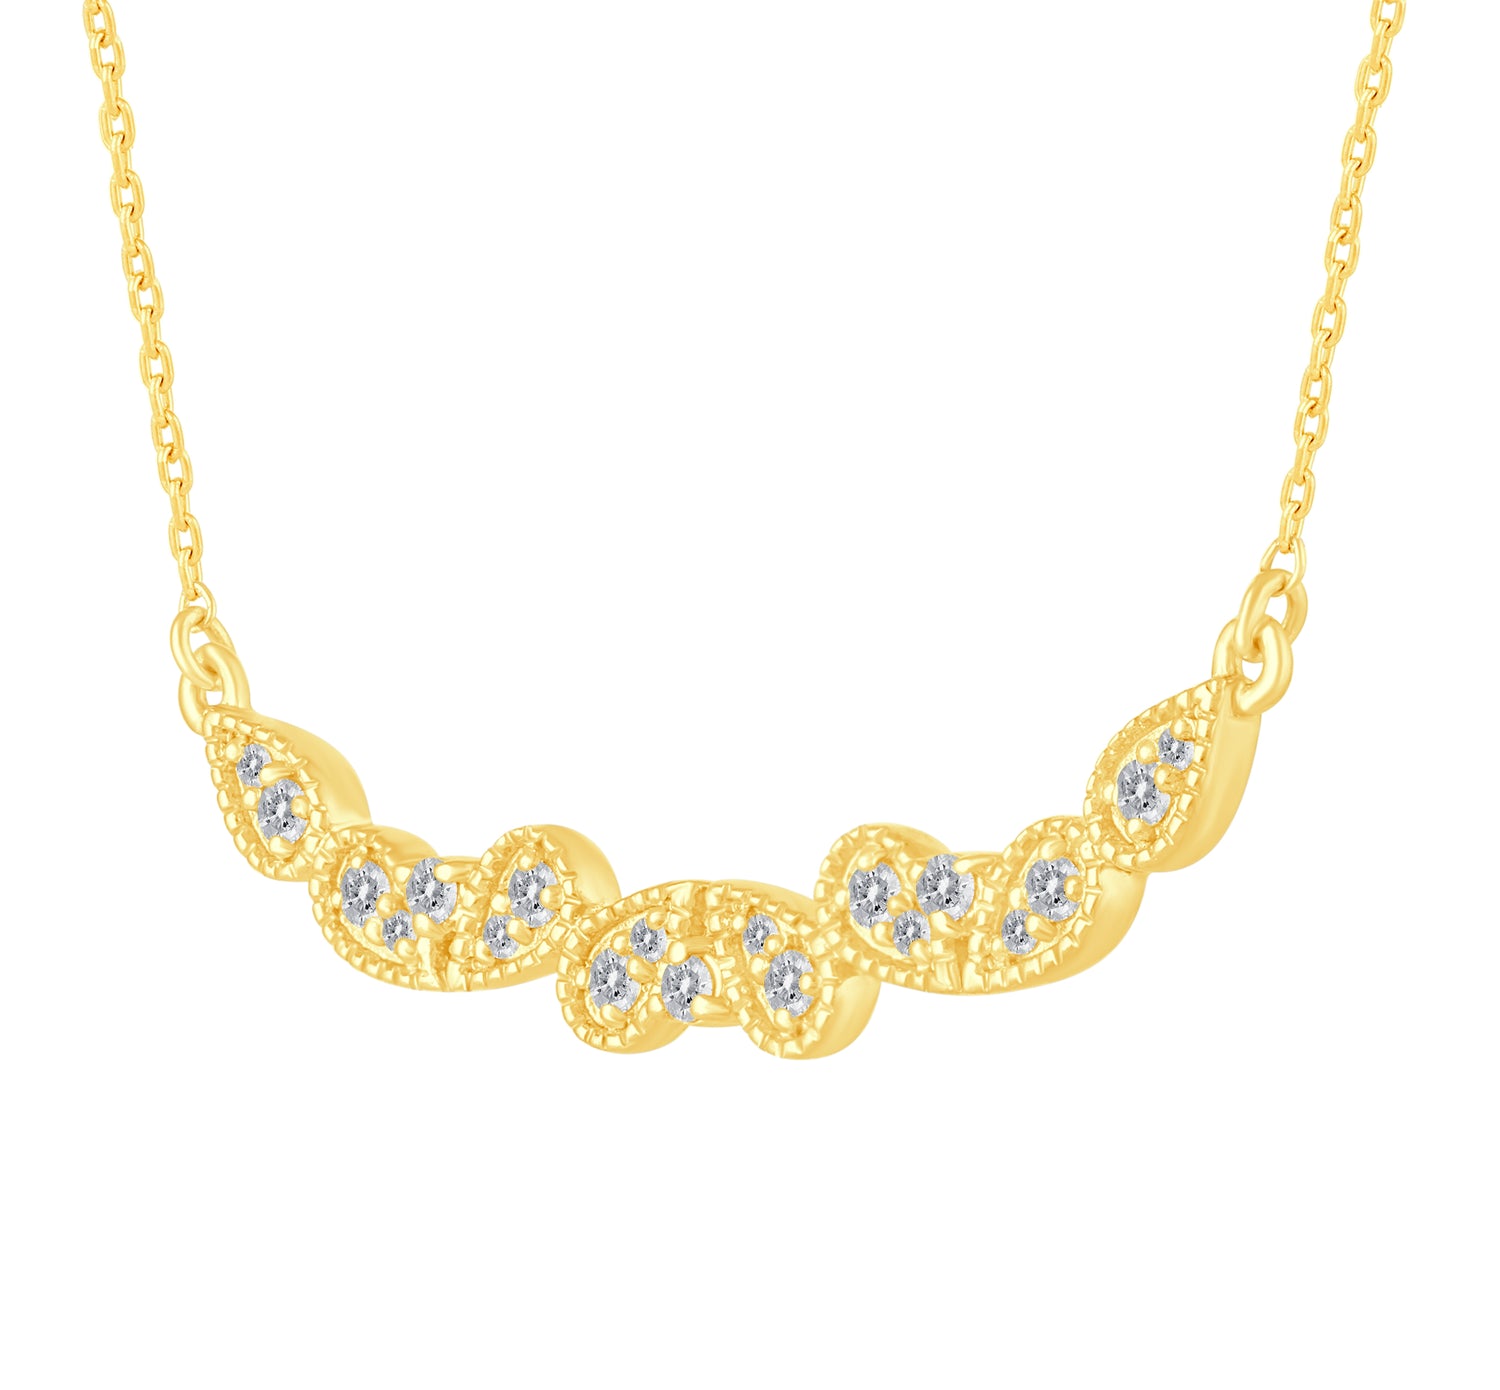 1/4 Cttw Diamond Mosaic Enchanted Bar Pendant Necklace set in 925 Sterling Silver Yellow Gold Plating